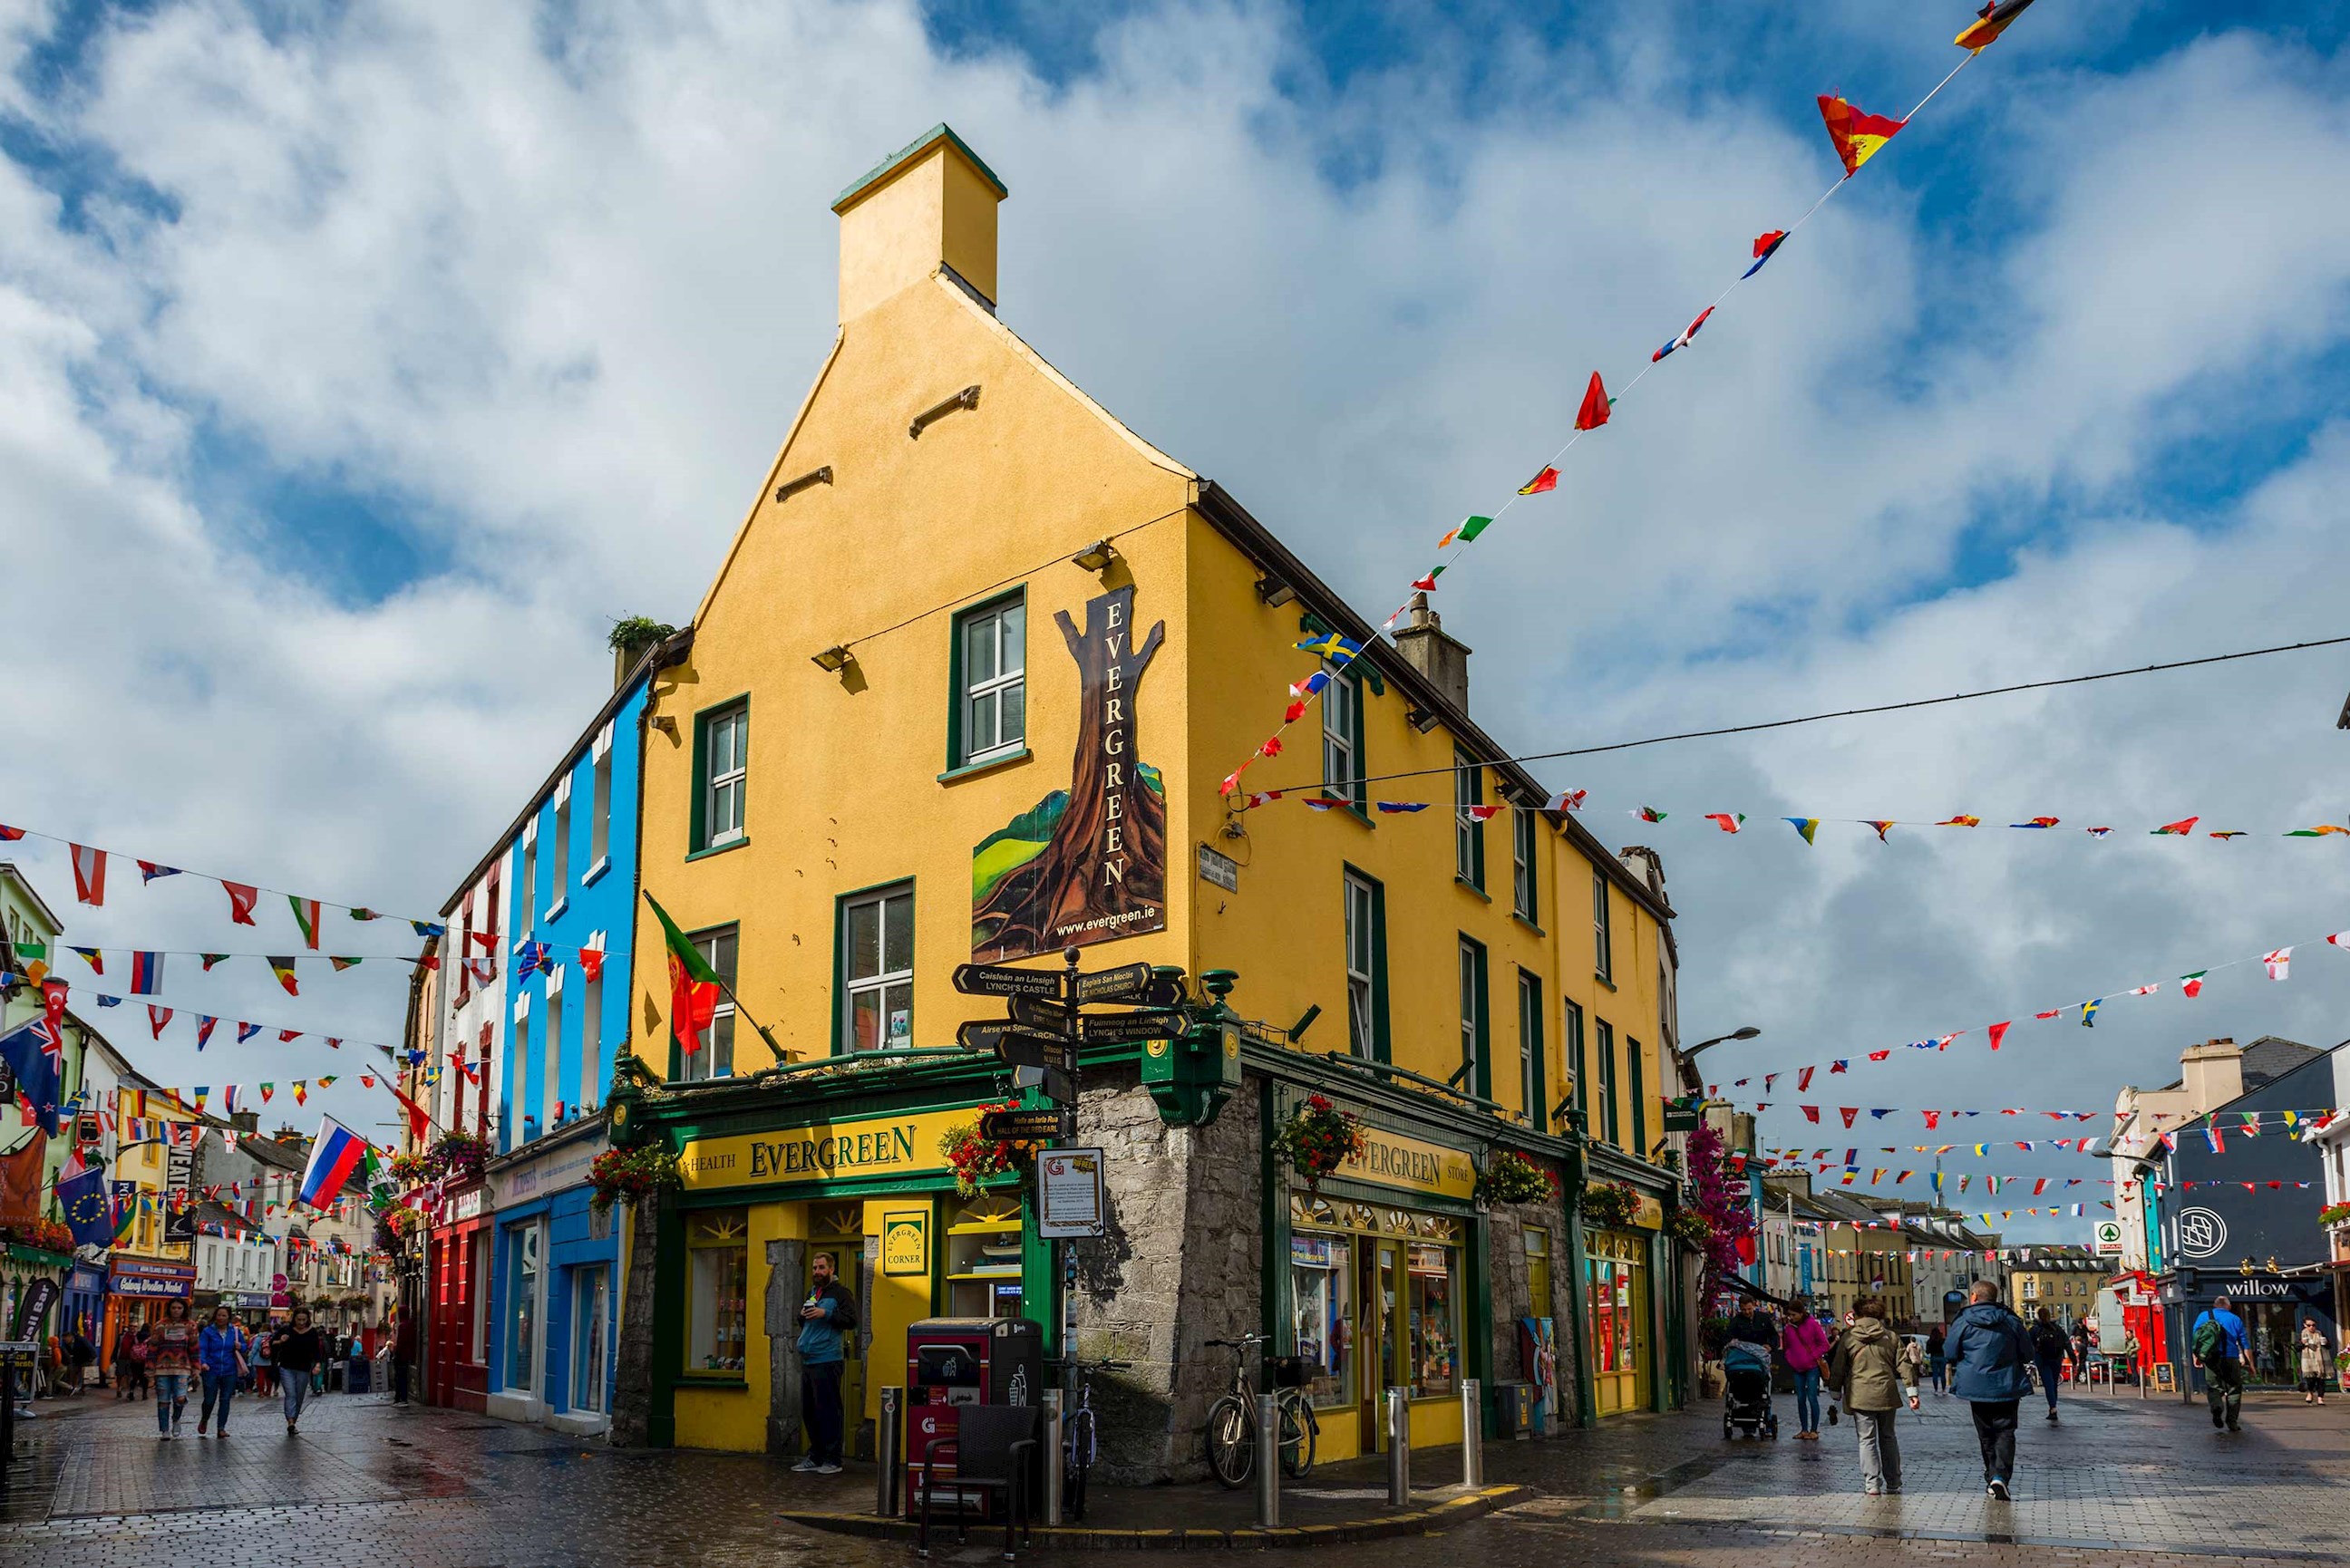 Walking tour and dinner in Galway, Ireland